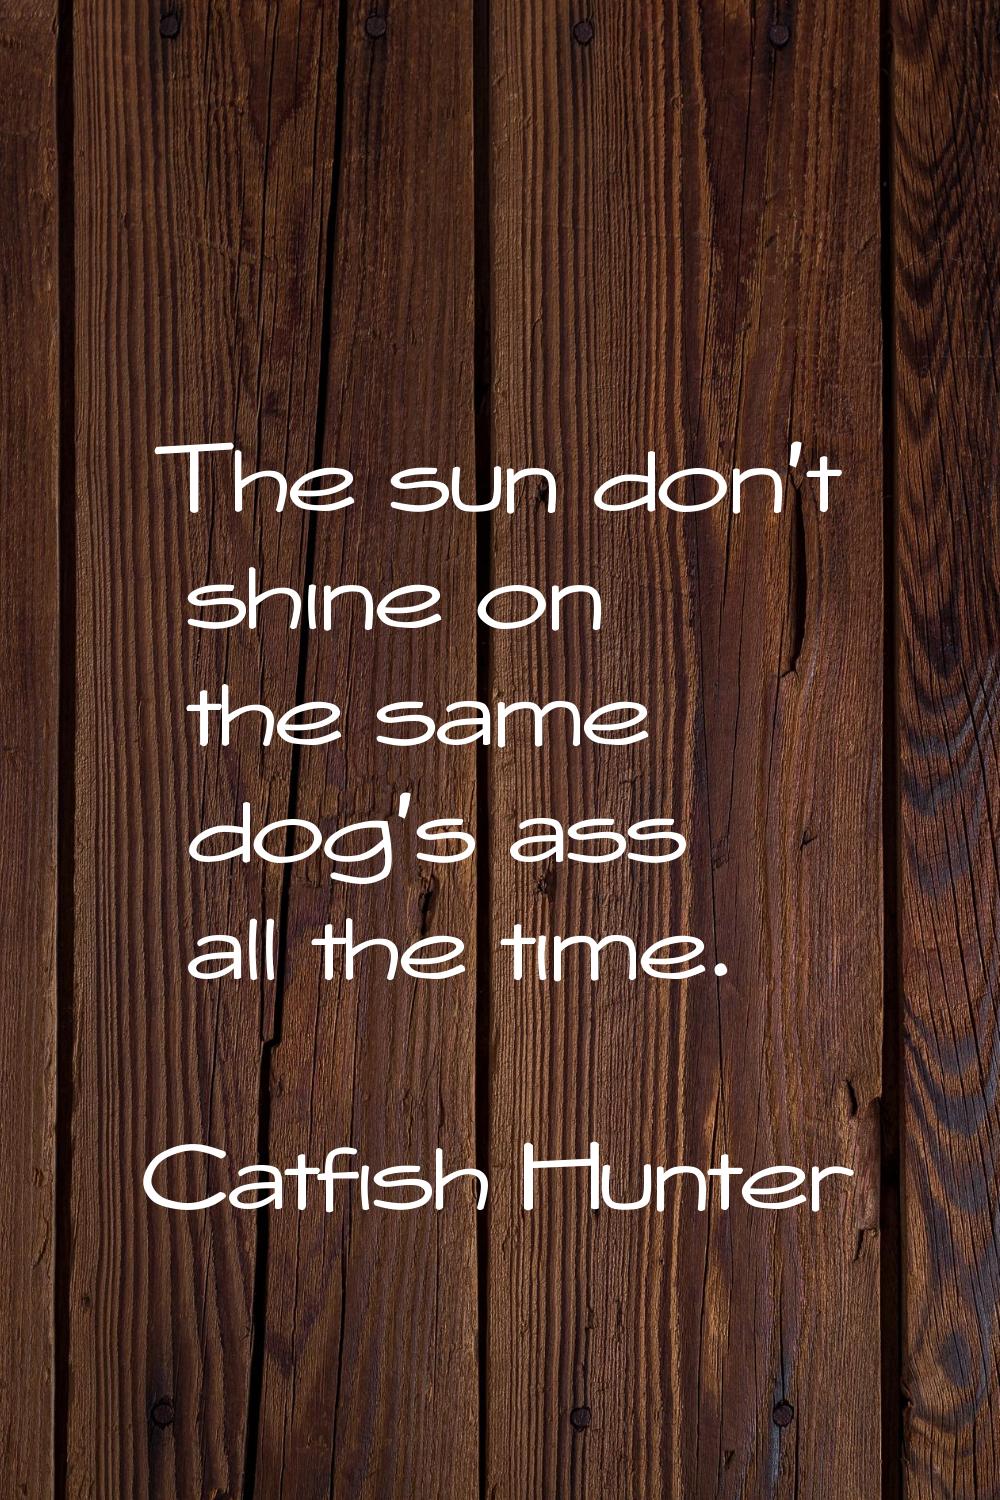 The sun don't shine on the same dog's ass all the time.